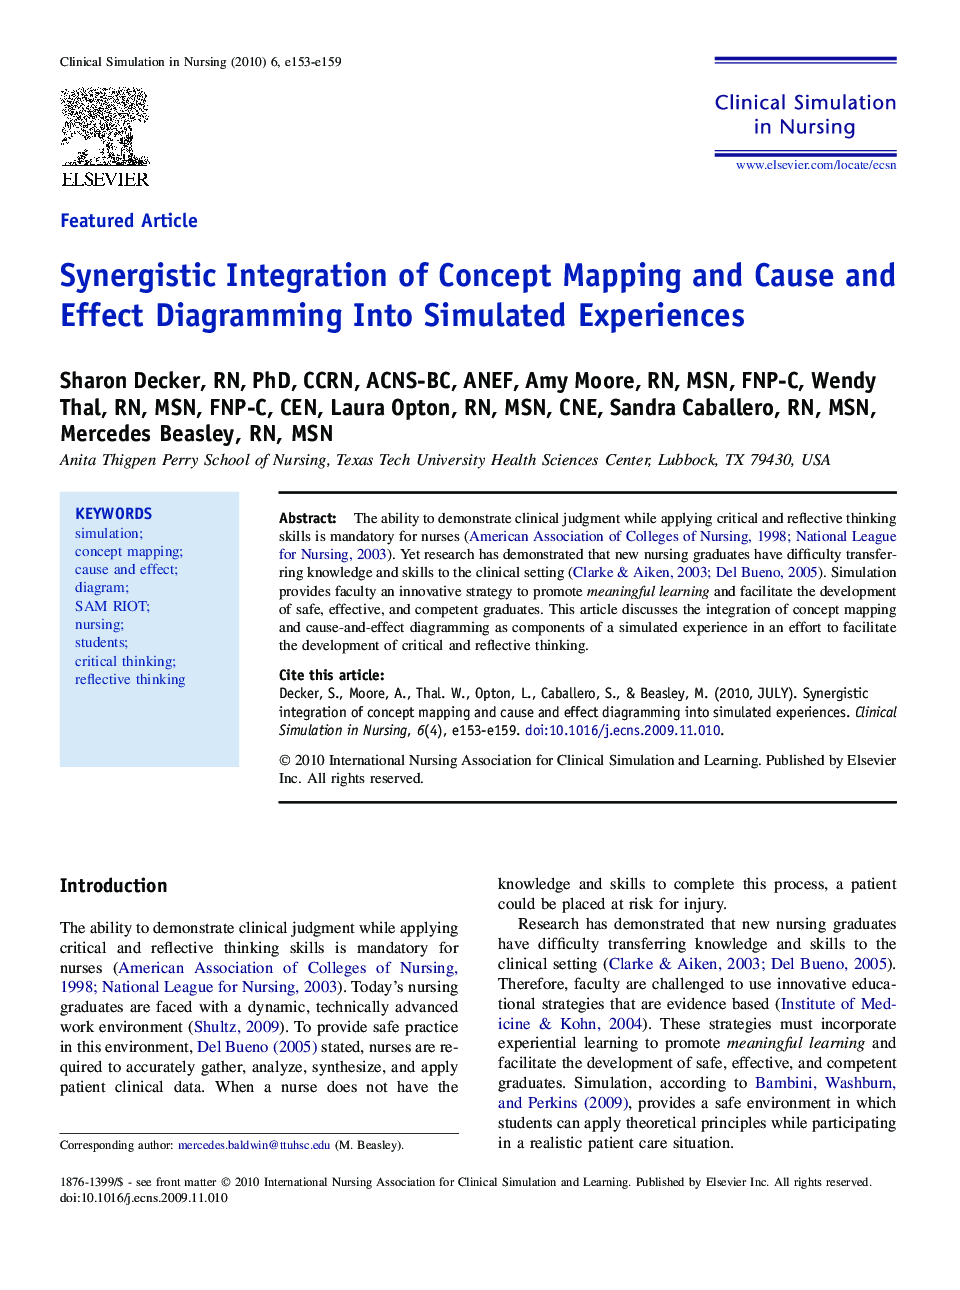 Synergistic Integration of Concept Mapping and Cause and Effect Diagramming Into Simulated Experiences 